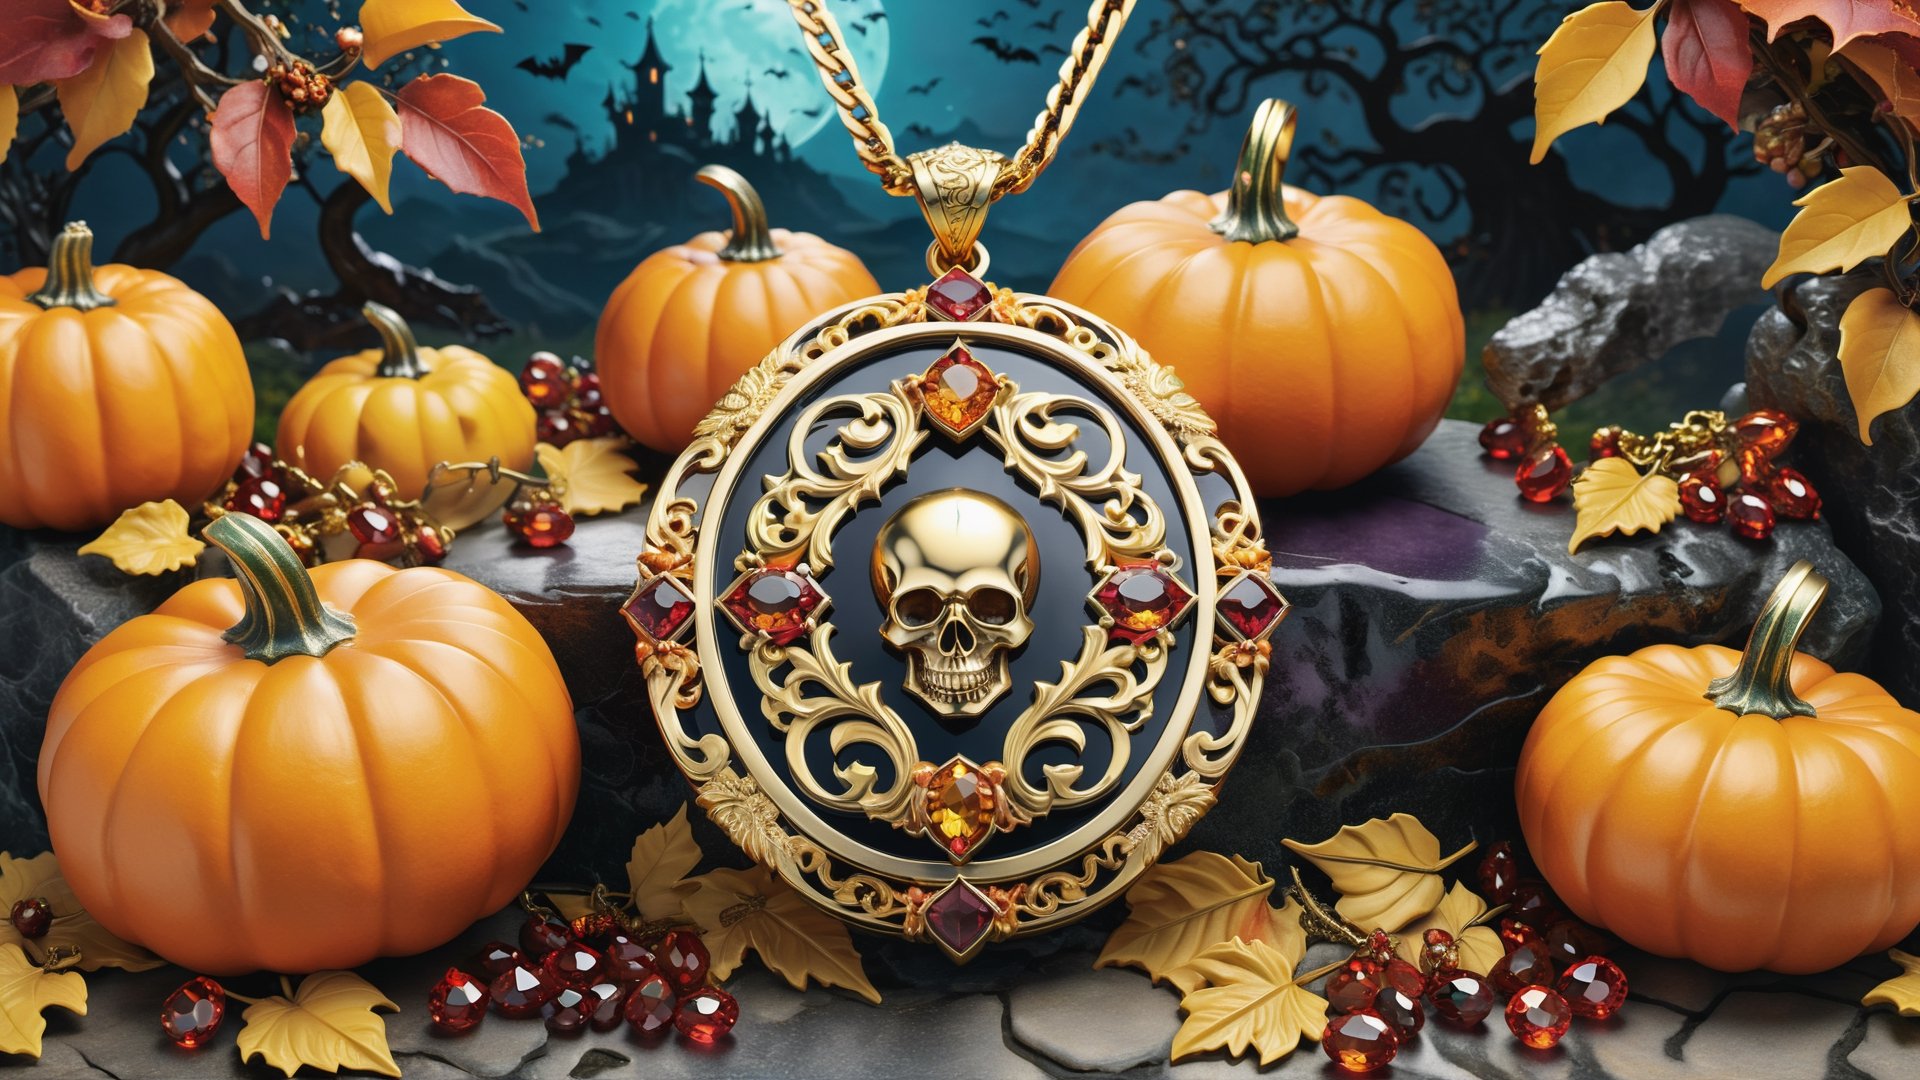 Photorealistic representation in high definition of luxurious and mythical chain pendant with oriental design, with precious stones, gold, glass and marble in a desert, with ornamental details in baroque style and immersed in autumn flowers and leaves, next to it it should be surrounded by pumpkins, with spooky paths, and details in skulls, a mythical Halloween scene immersed in the majestic background of a garden with a baroque theme, Halloween autumn theme